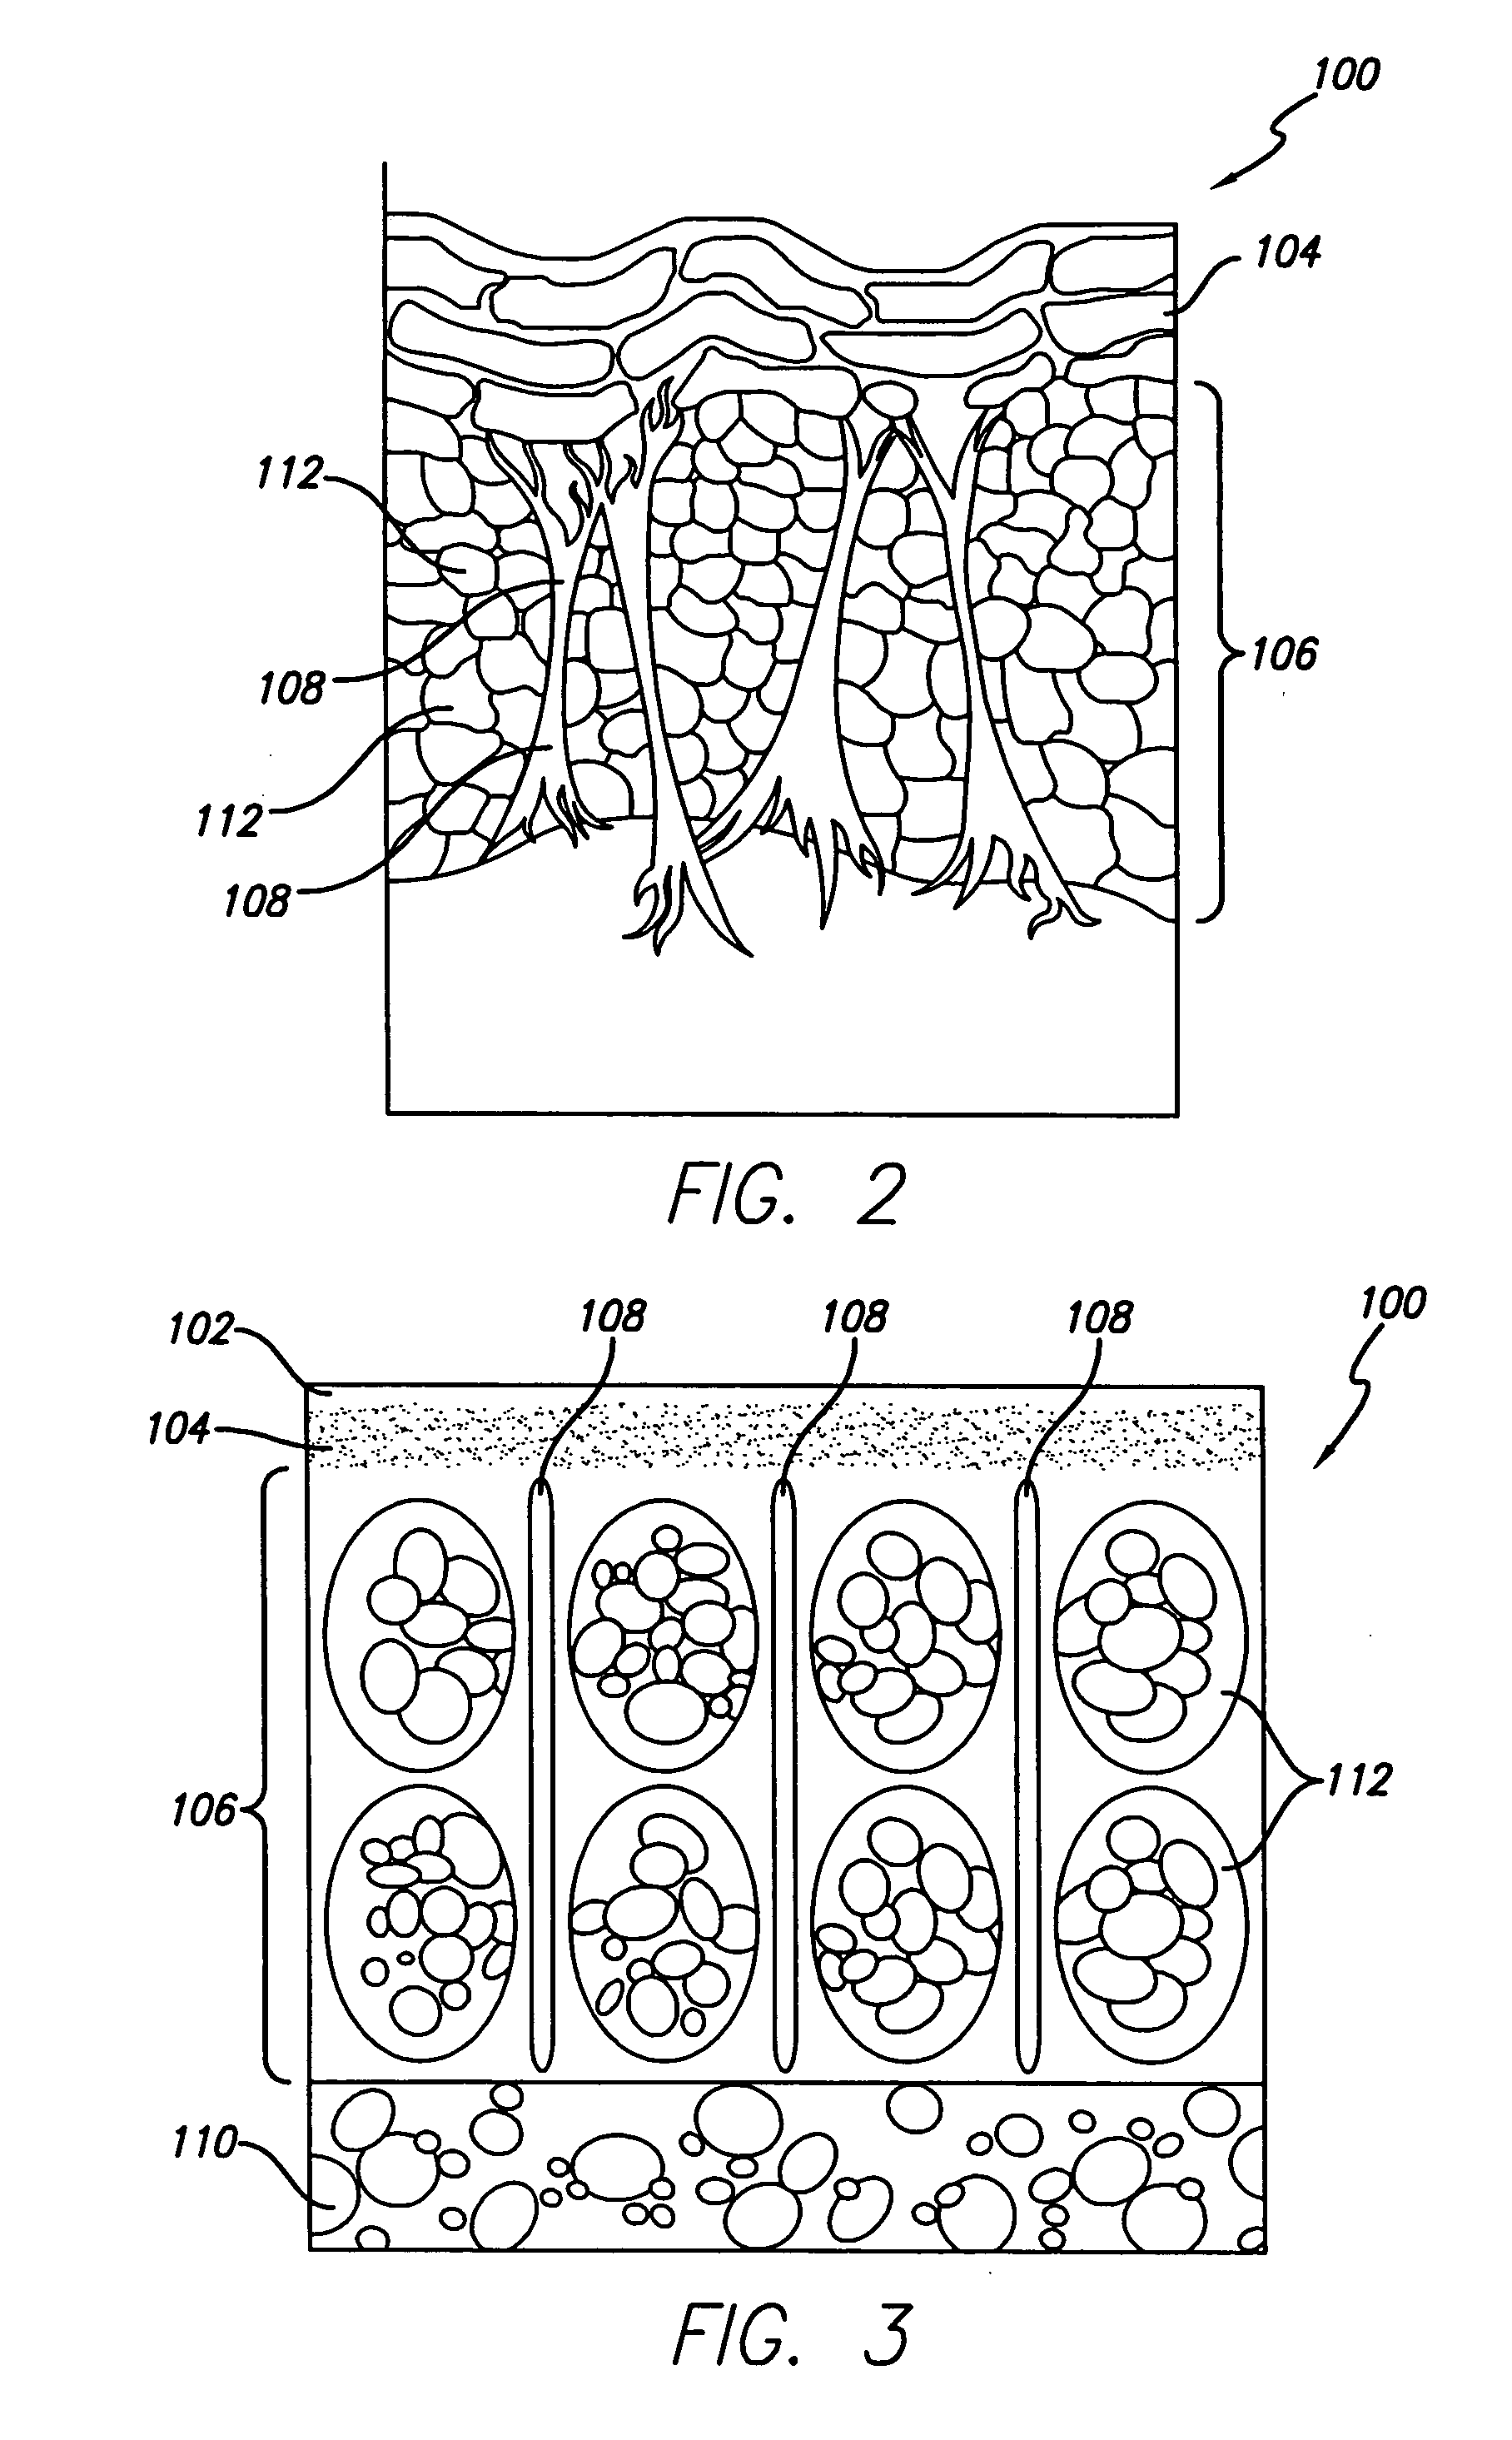 System for treating subcutaneous tissues